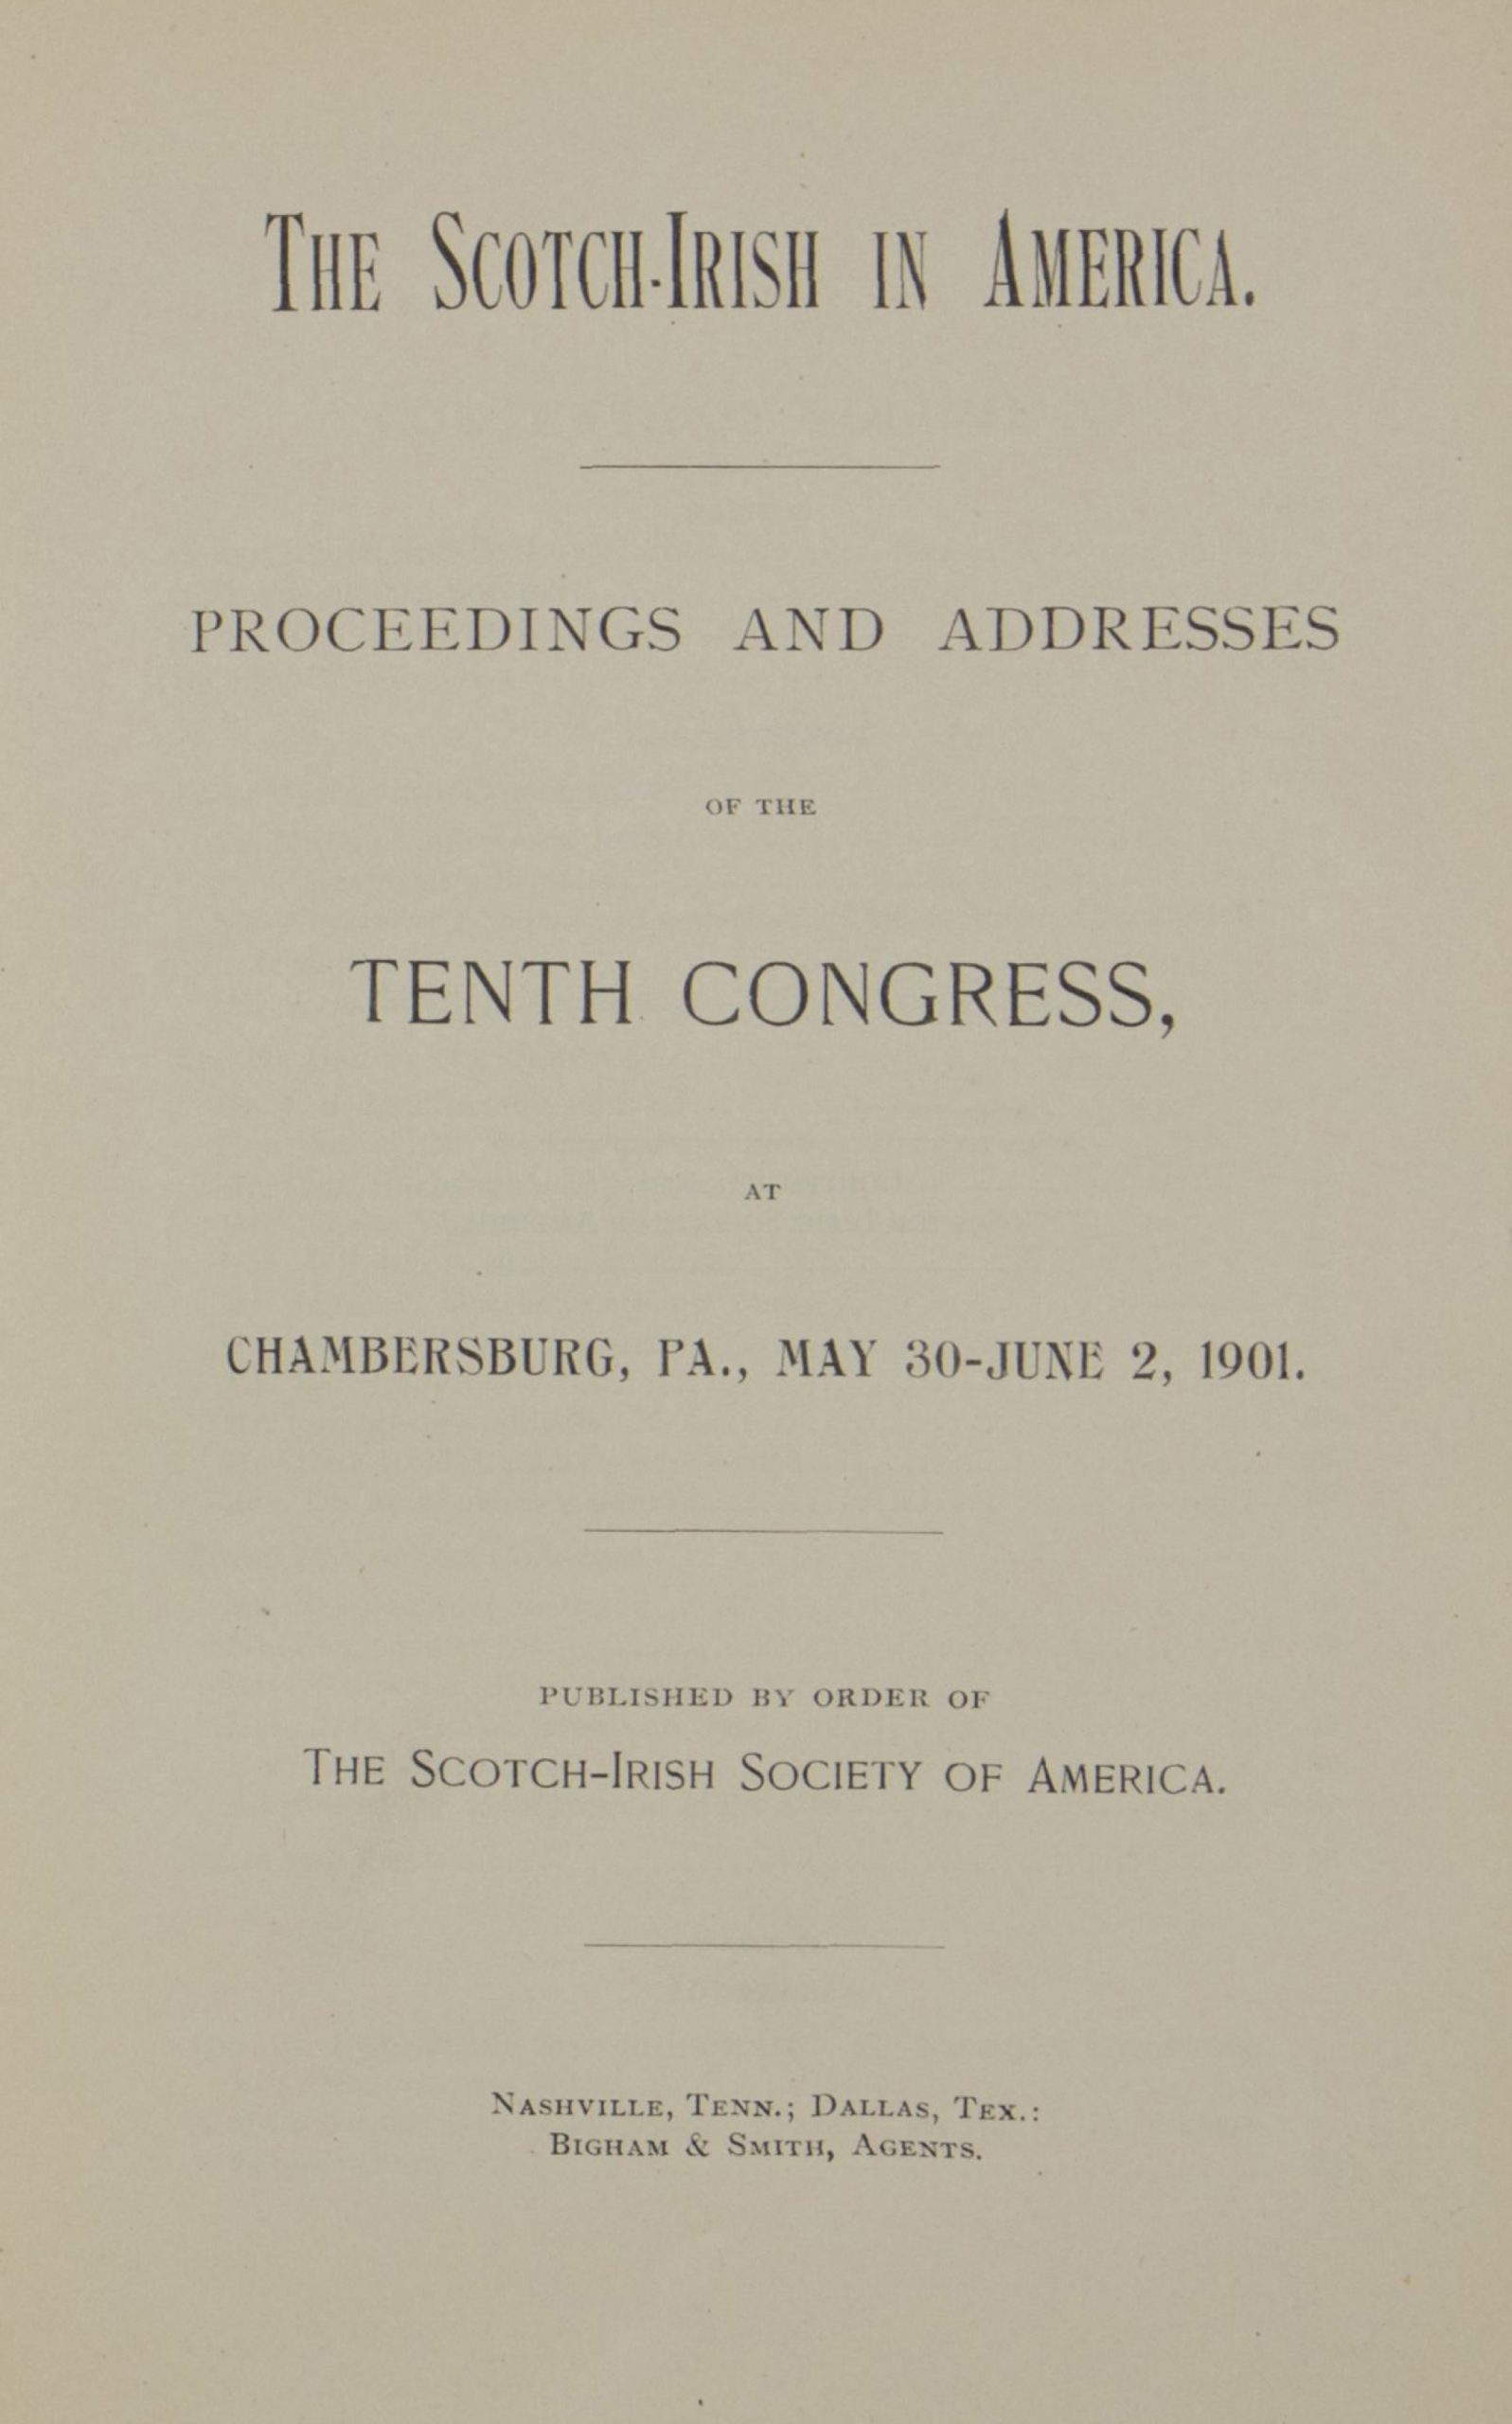 The Scotch-Irish in America, Proceedings and Addresses of the Tenth Congress